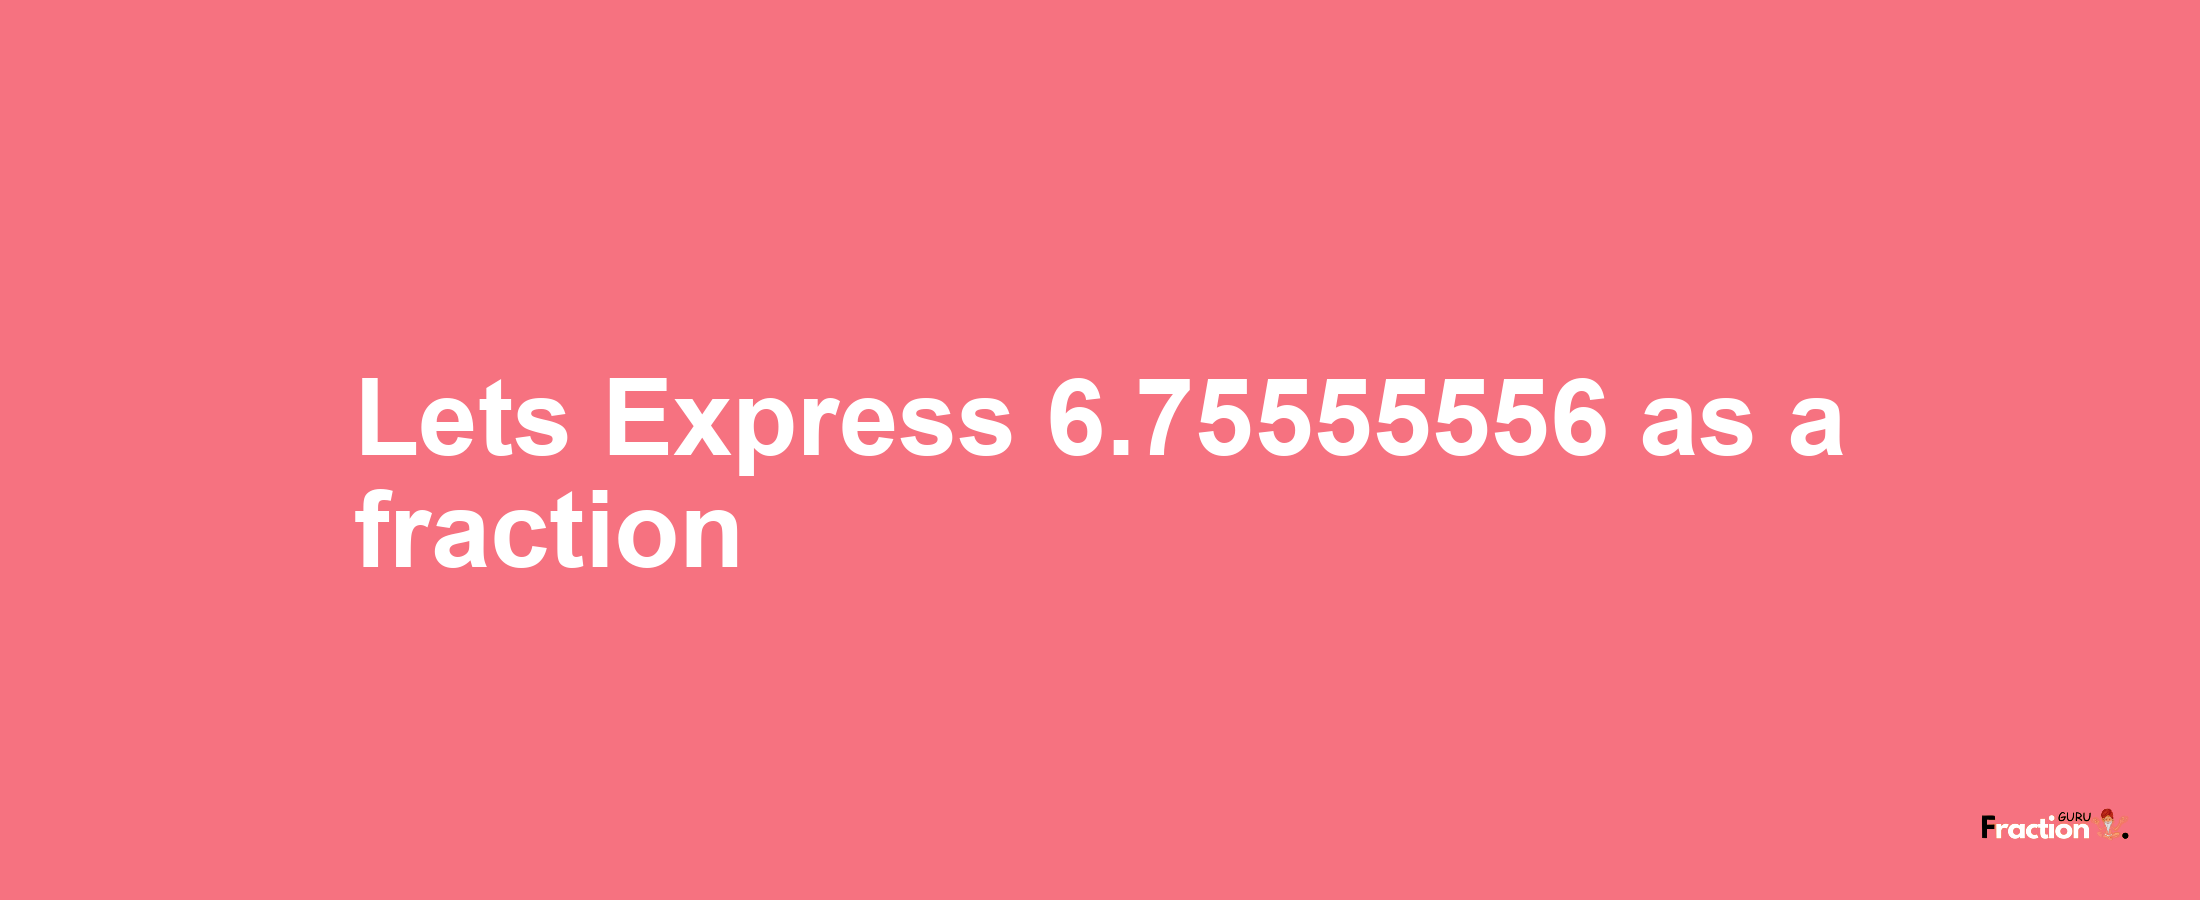 Lets Express 6.75555556 as afraction